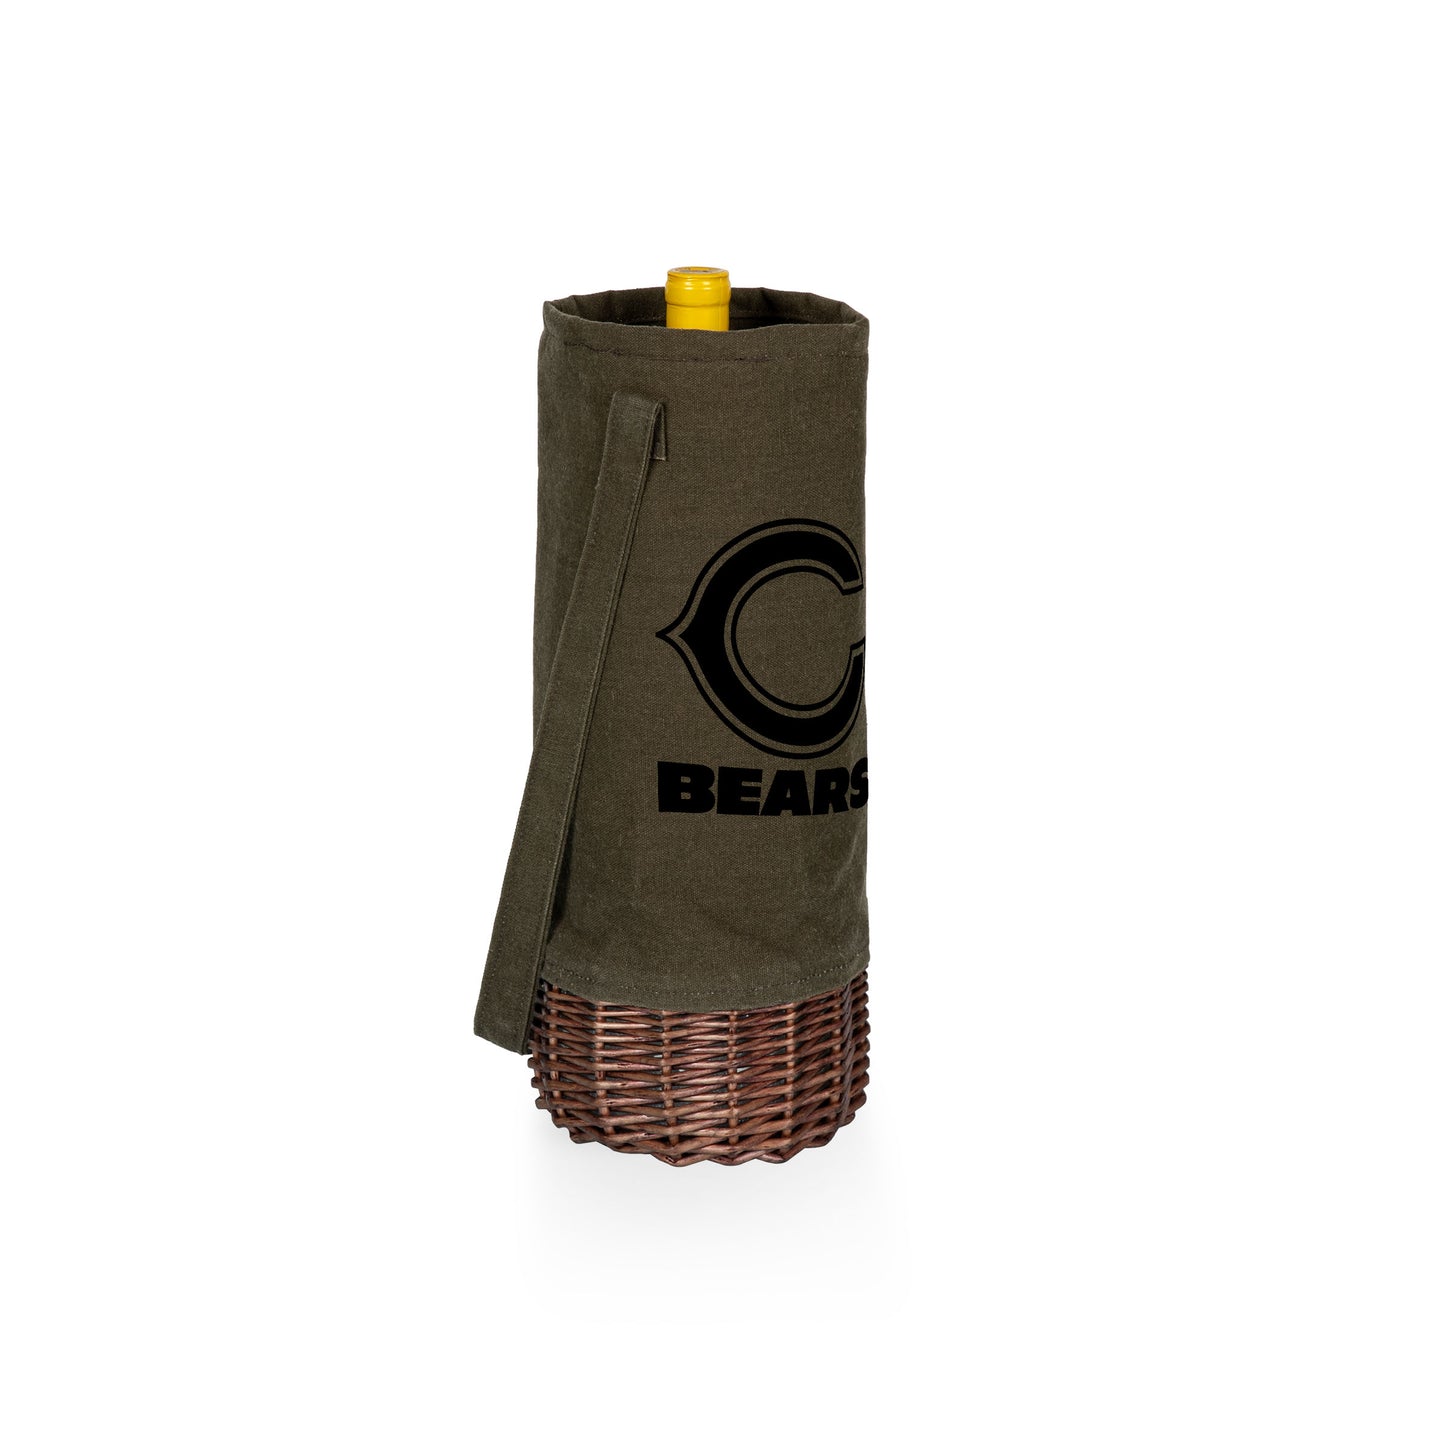 Chicago Bears - Malbec Insulated Canvas and Willow Wine Bottle Basket